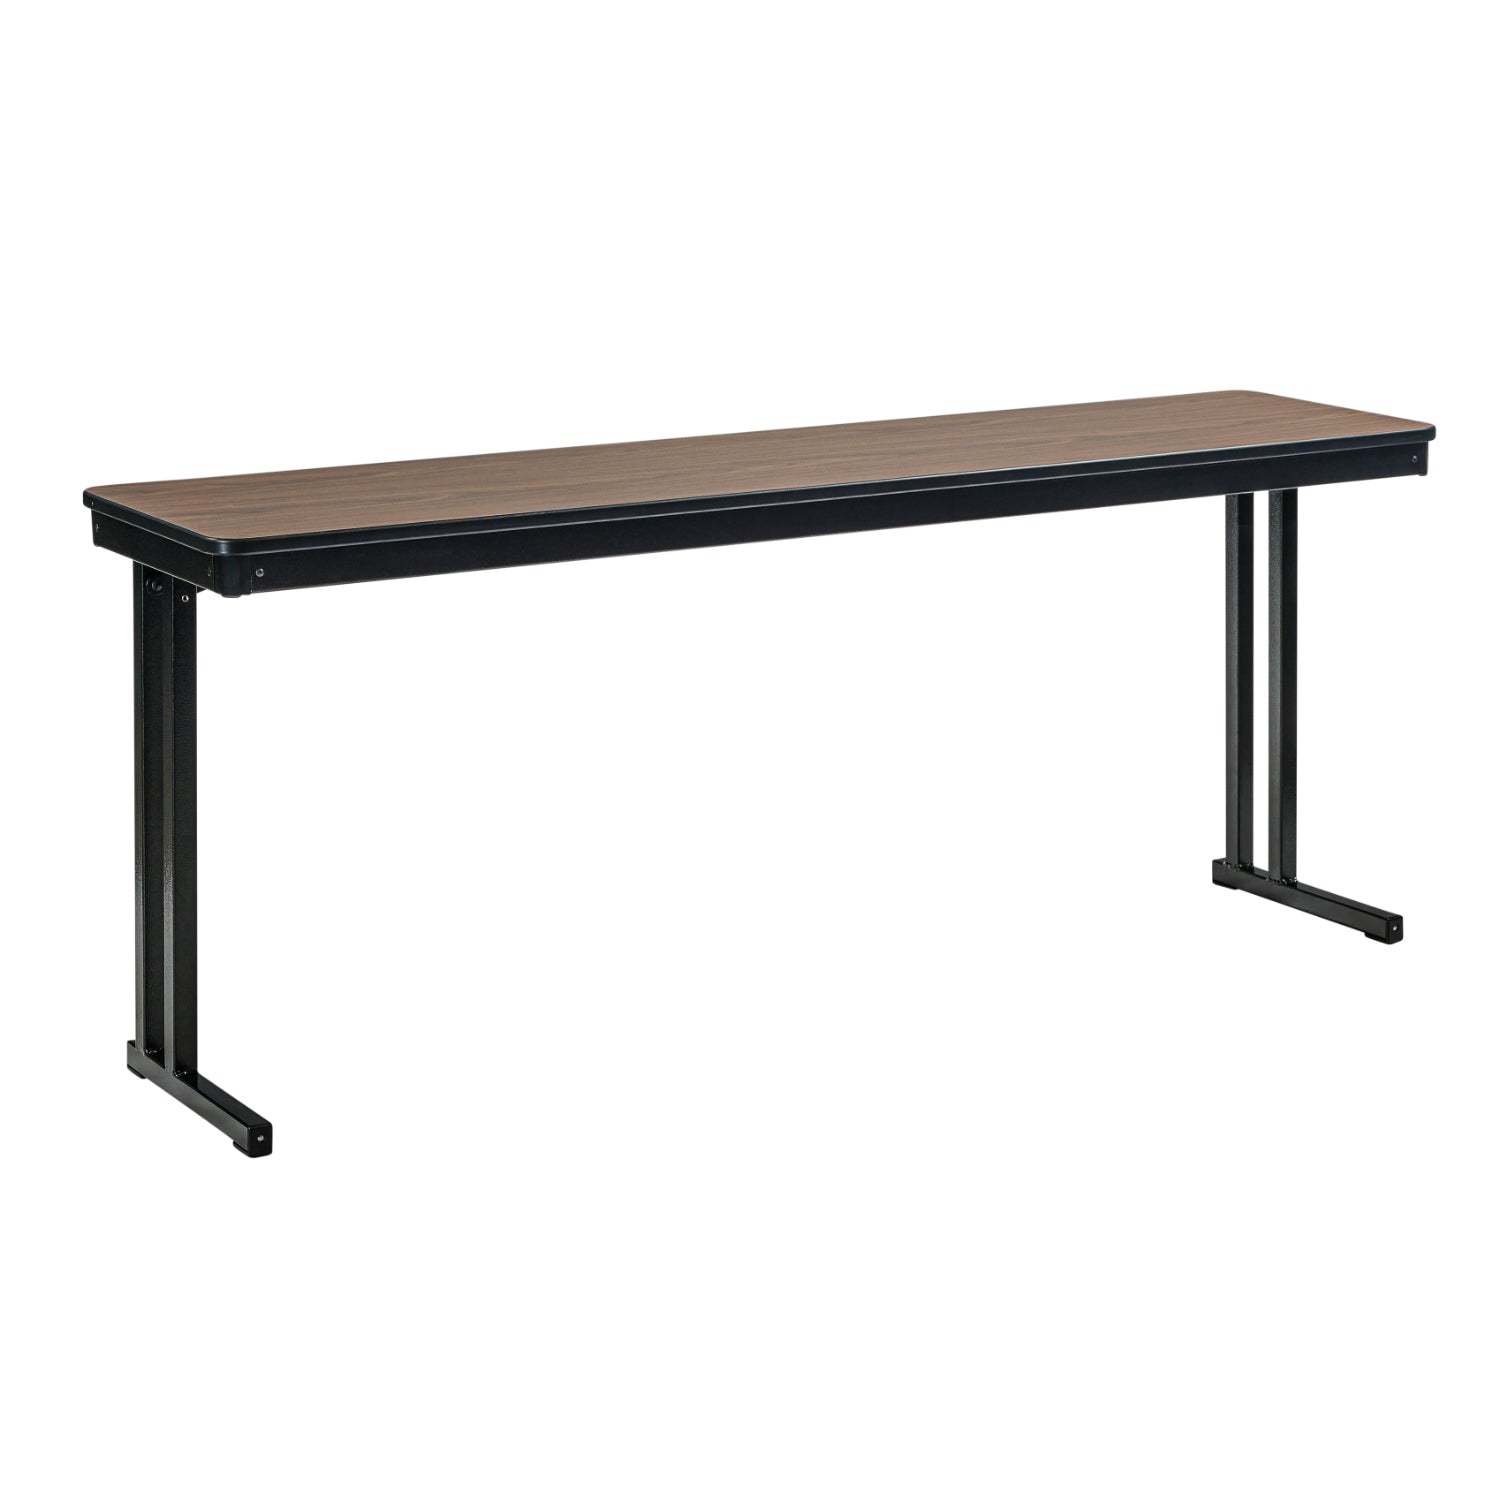 Max Seating Folding Training and Seminar Table with Cantilever Legs, 24" x 84", High Pressure Laminate Top with Plywood Core/PVC Edge Banding